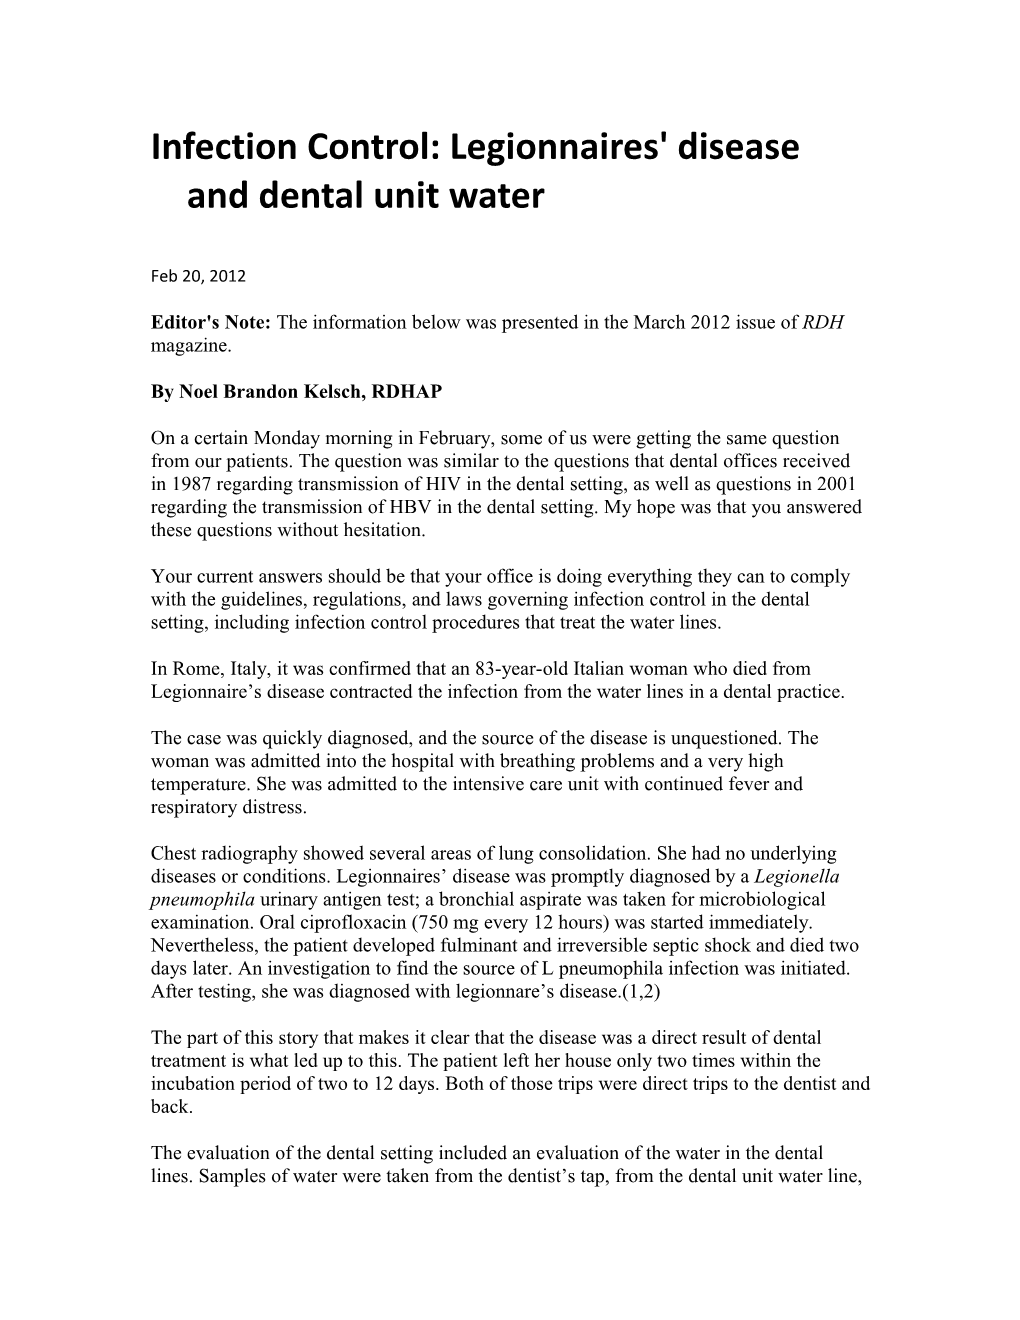 Infection Control: Legionnaires' Disease and Dental Unit Water